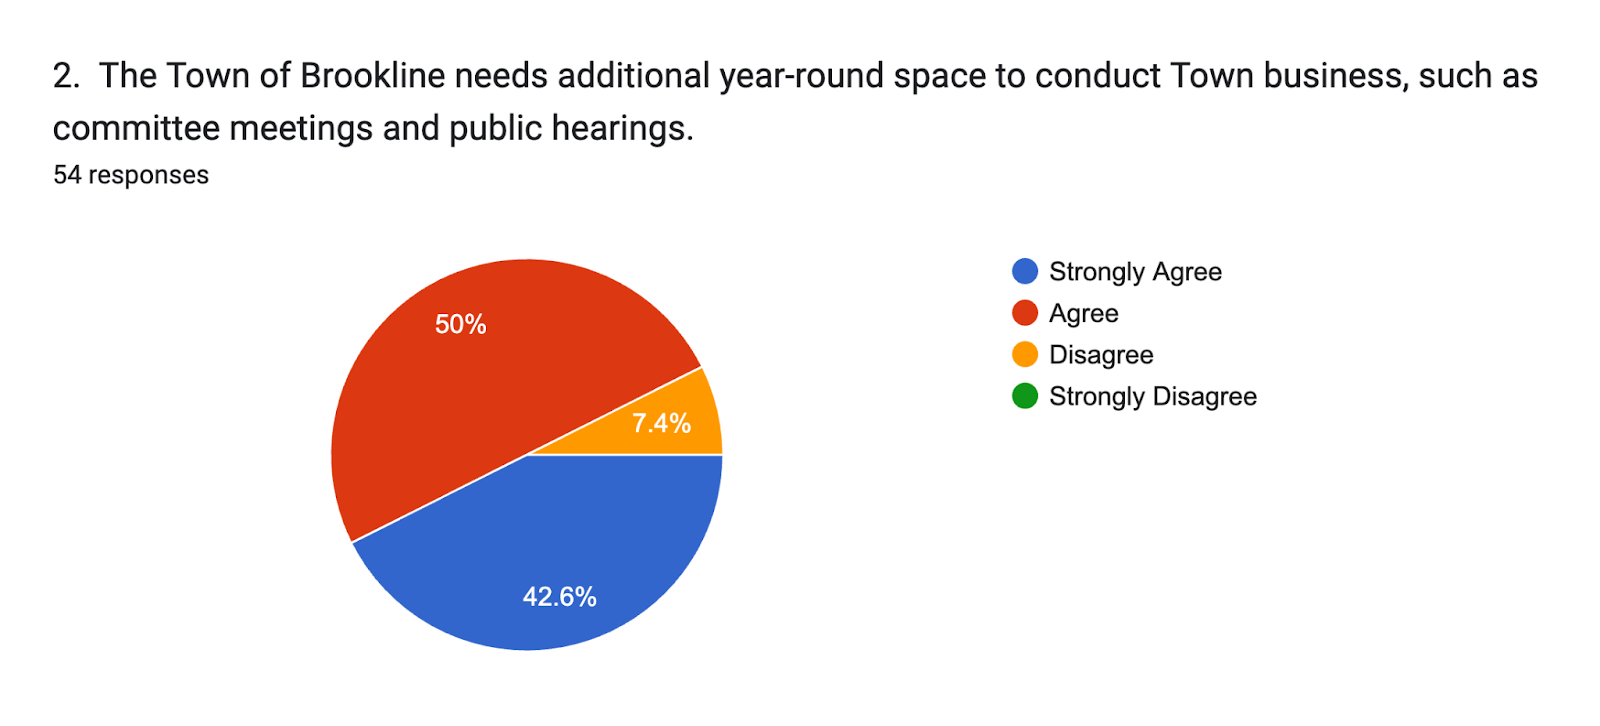 Forms response chart. Question title: 2.  The Town of Brookline needs additional year-round space to conduct Town business, such as committee meetings and public hearings.. Number of responses: 54 responses.